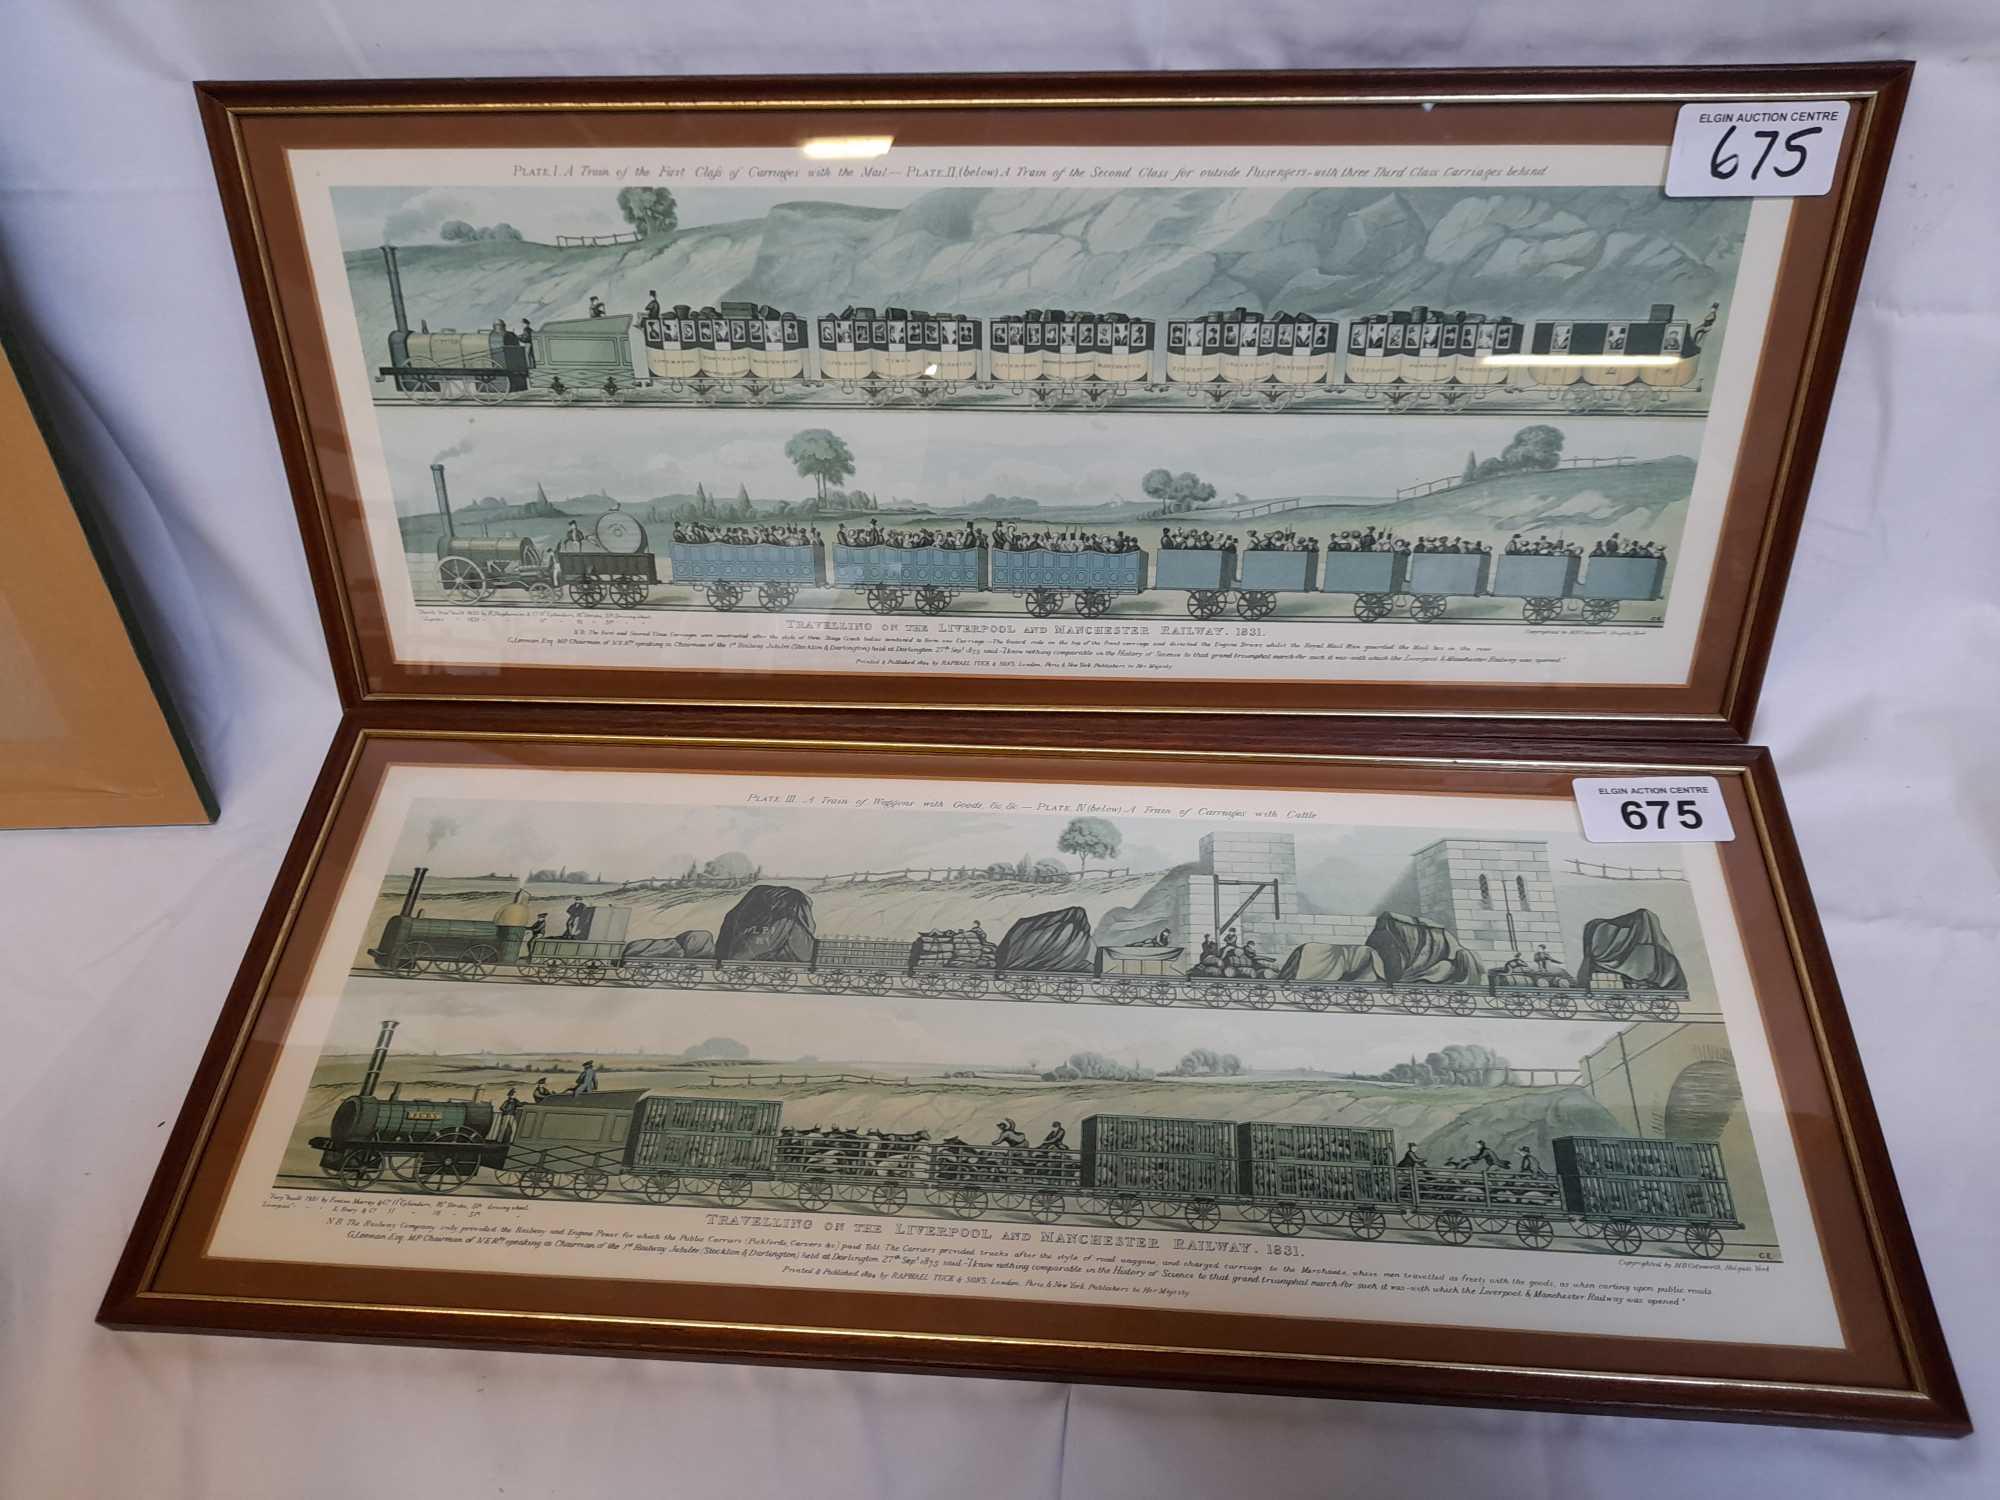 2 PRINTS LIVERPOOL & MANCHESTER RAILWAY 1831 - Image 2 of 6